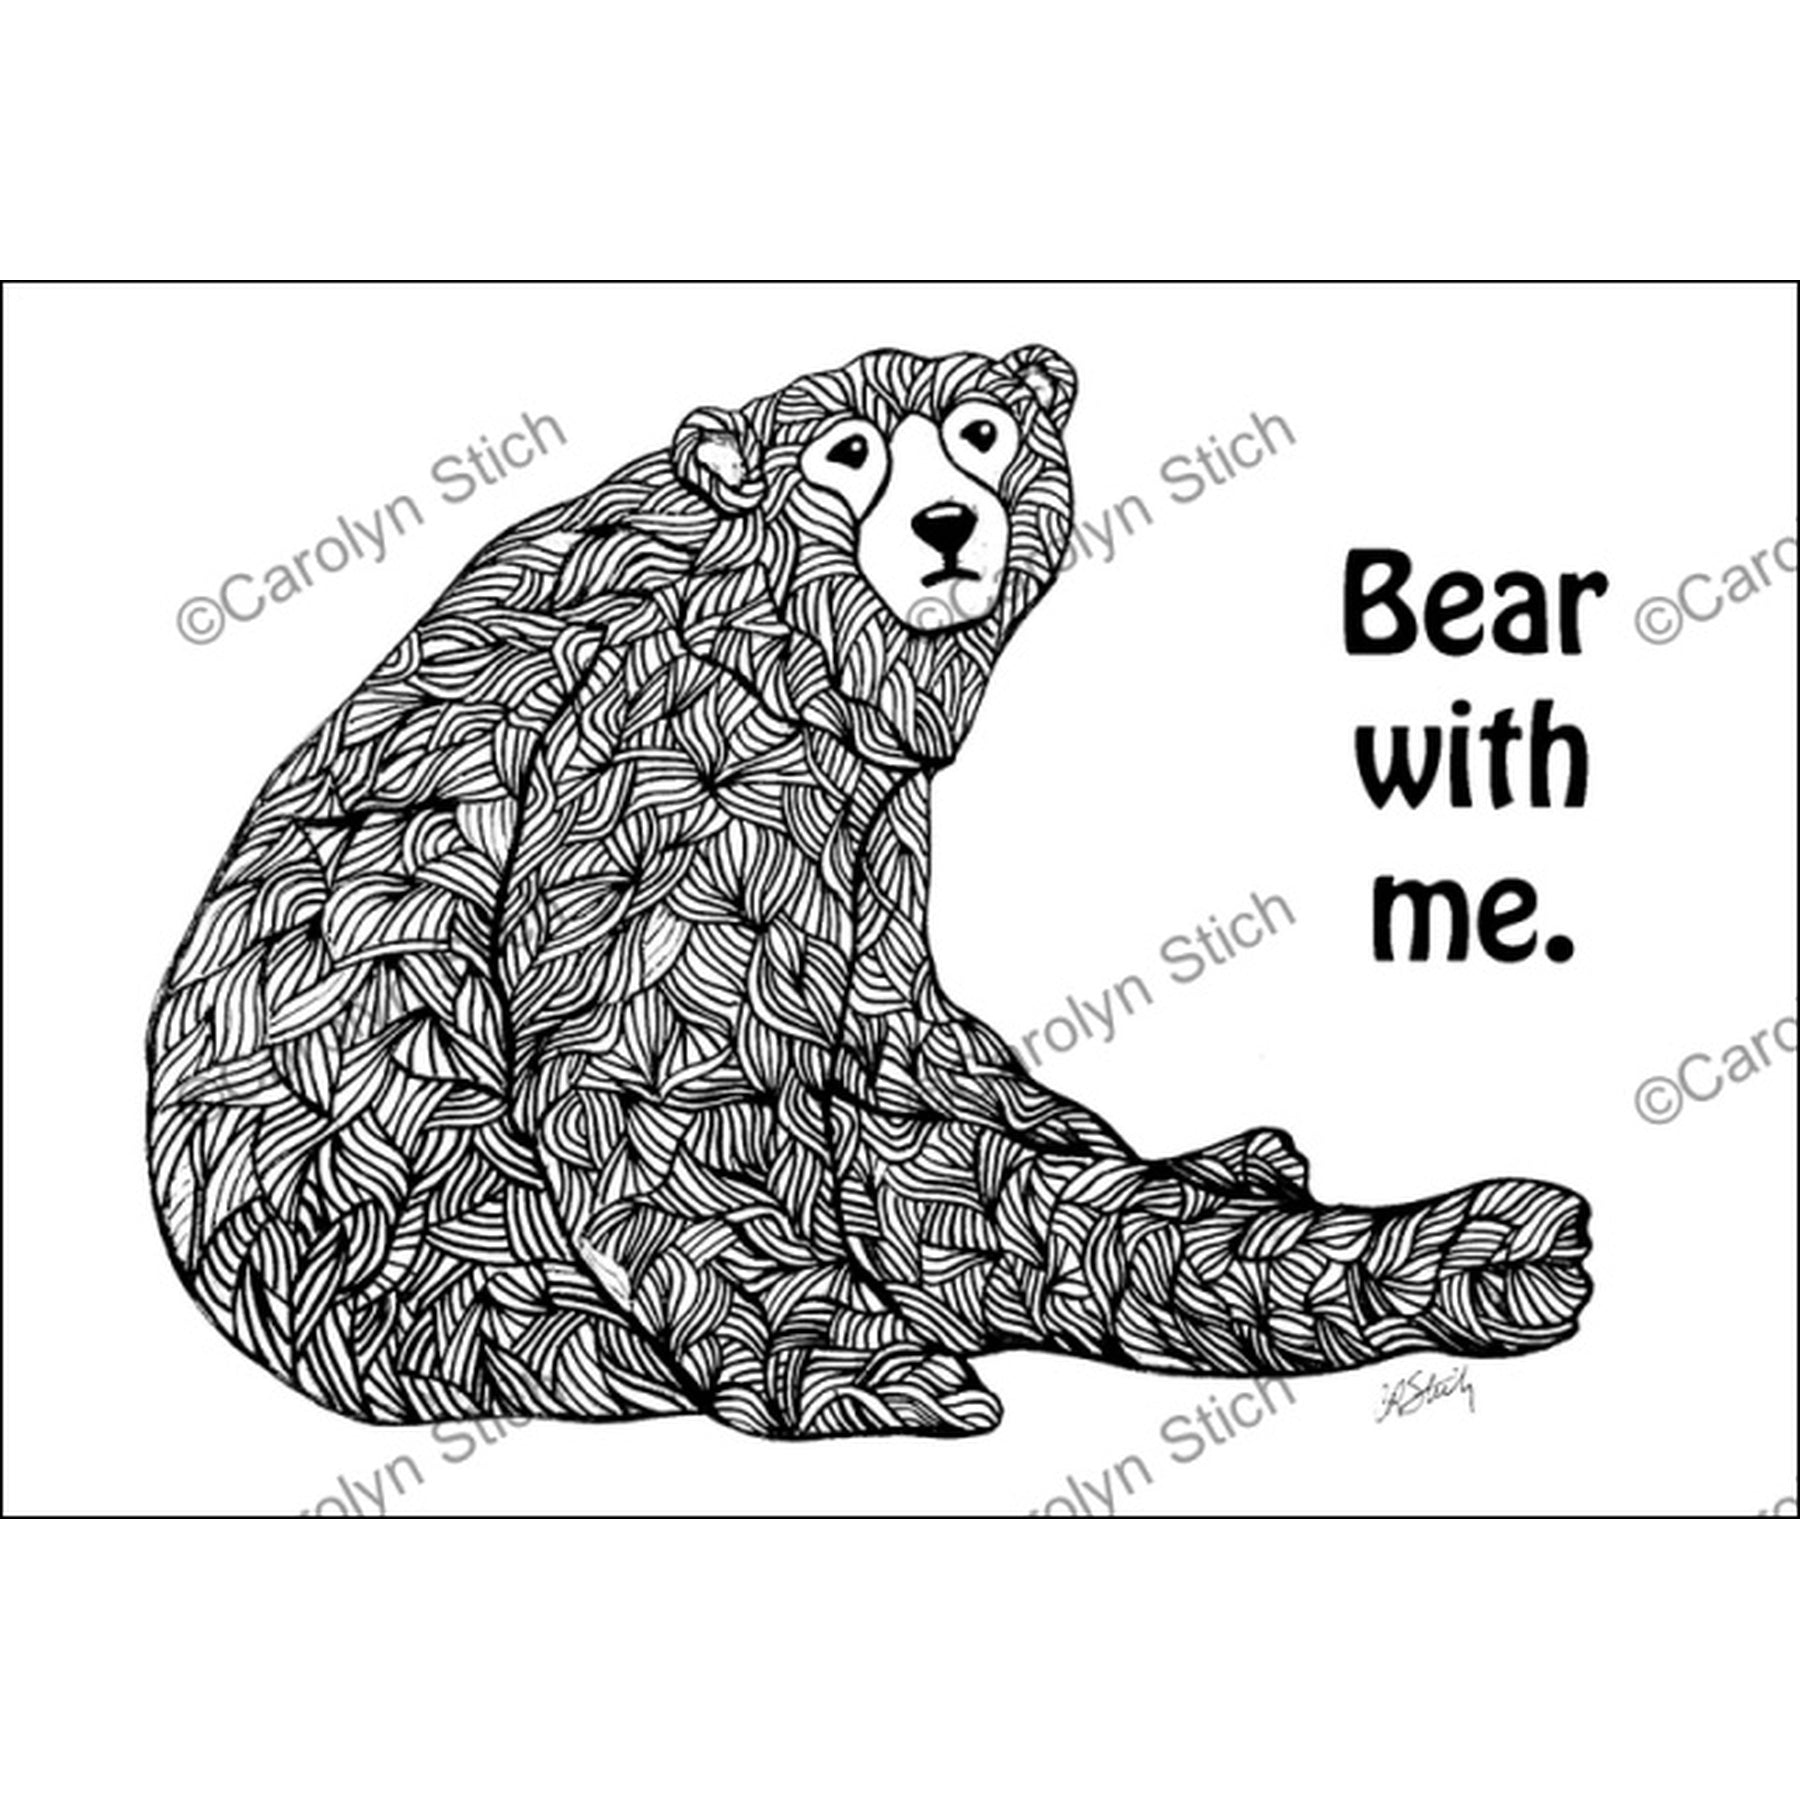 Bear With Me, rug hooking pattern